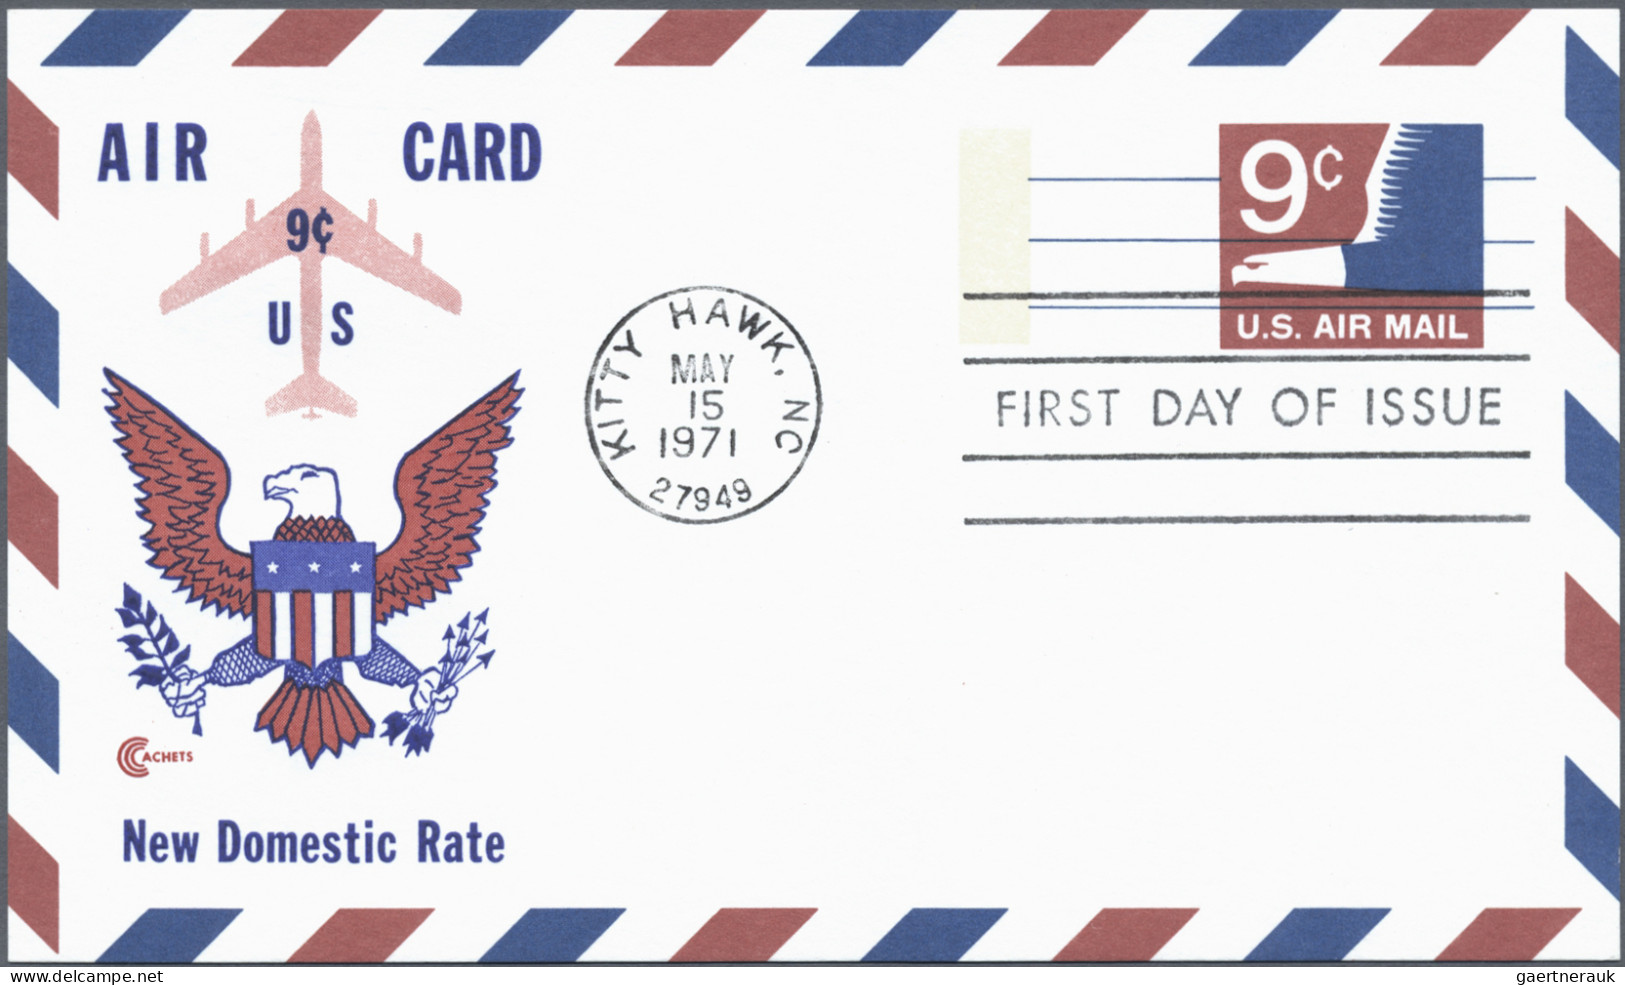 United States - Postal Stationary: 1963/1975, Postal Cards with IMPRINT (CACHET)